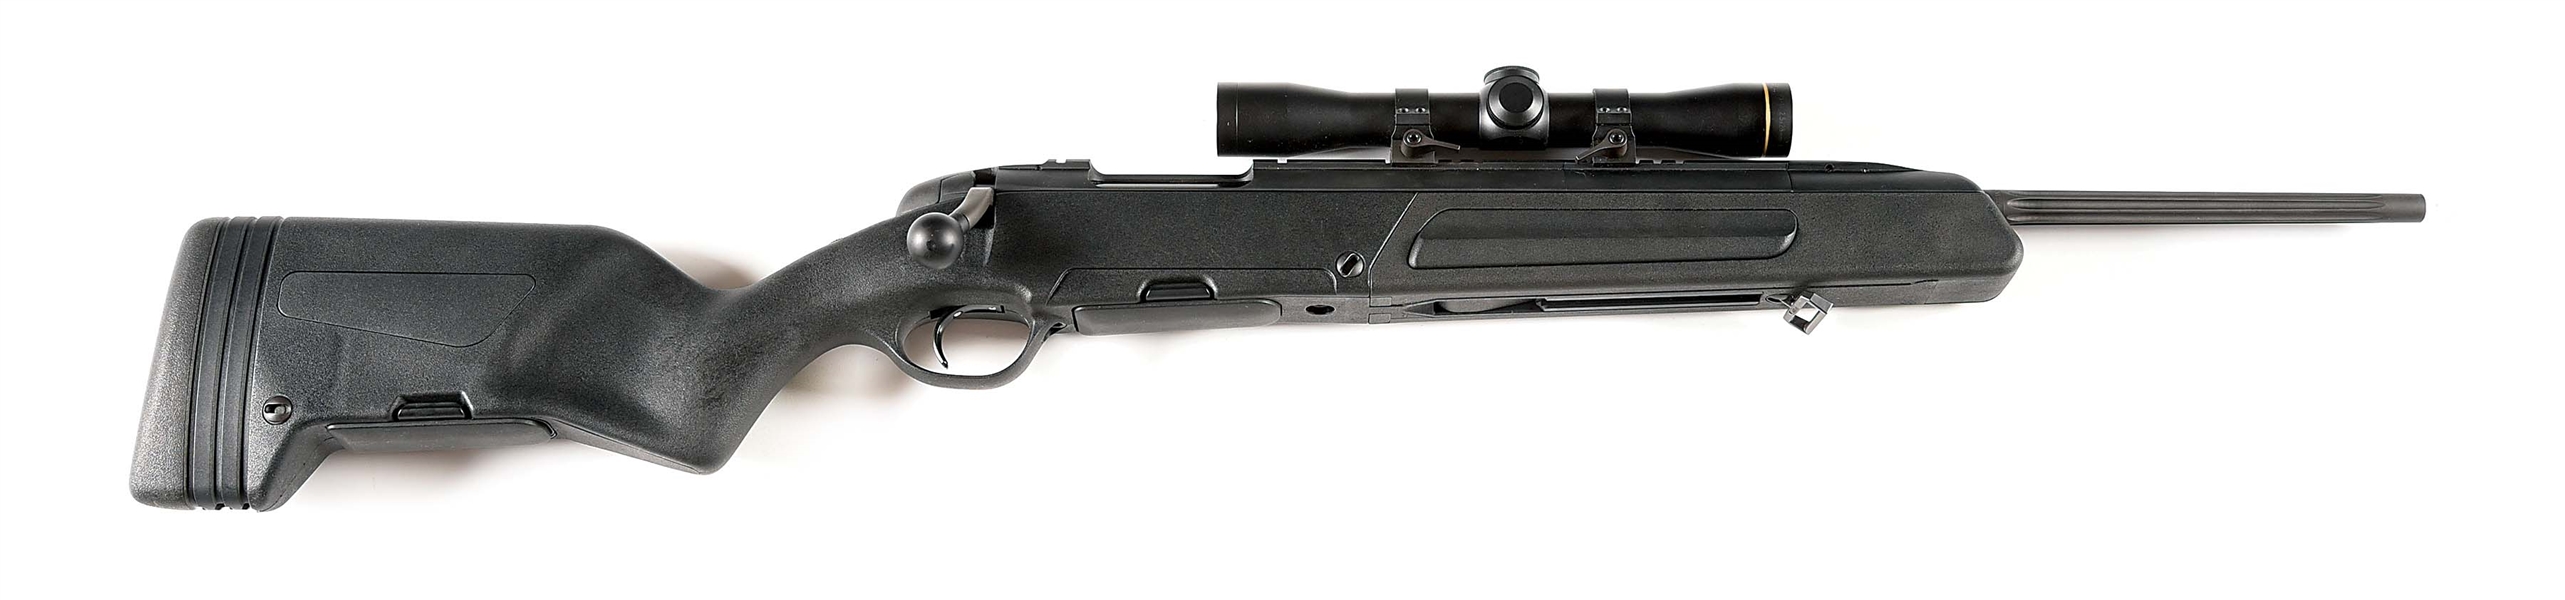 (M) STEYR SCOUT .243 WINCHESTER BOLT ACTION RIFLE WITH LEUPOLD SCOPE.